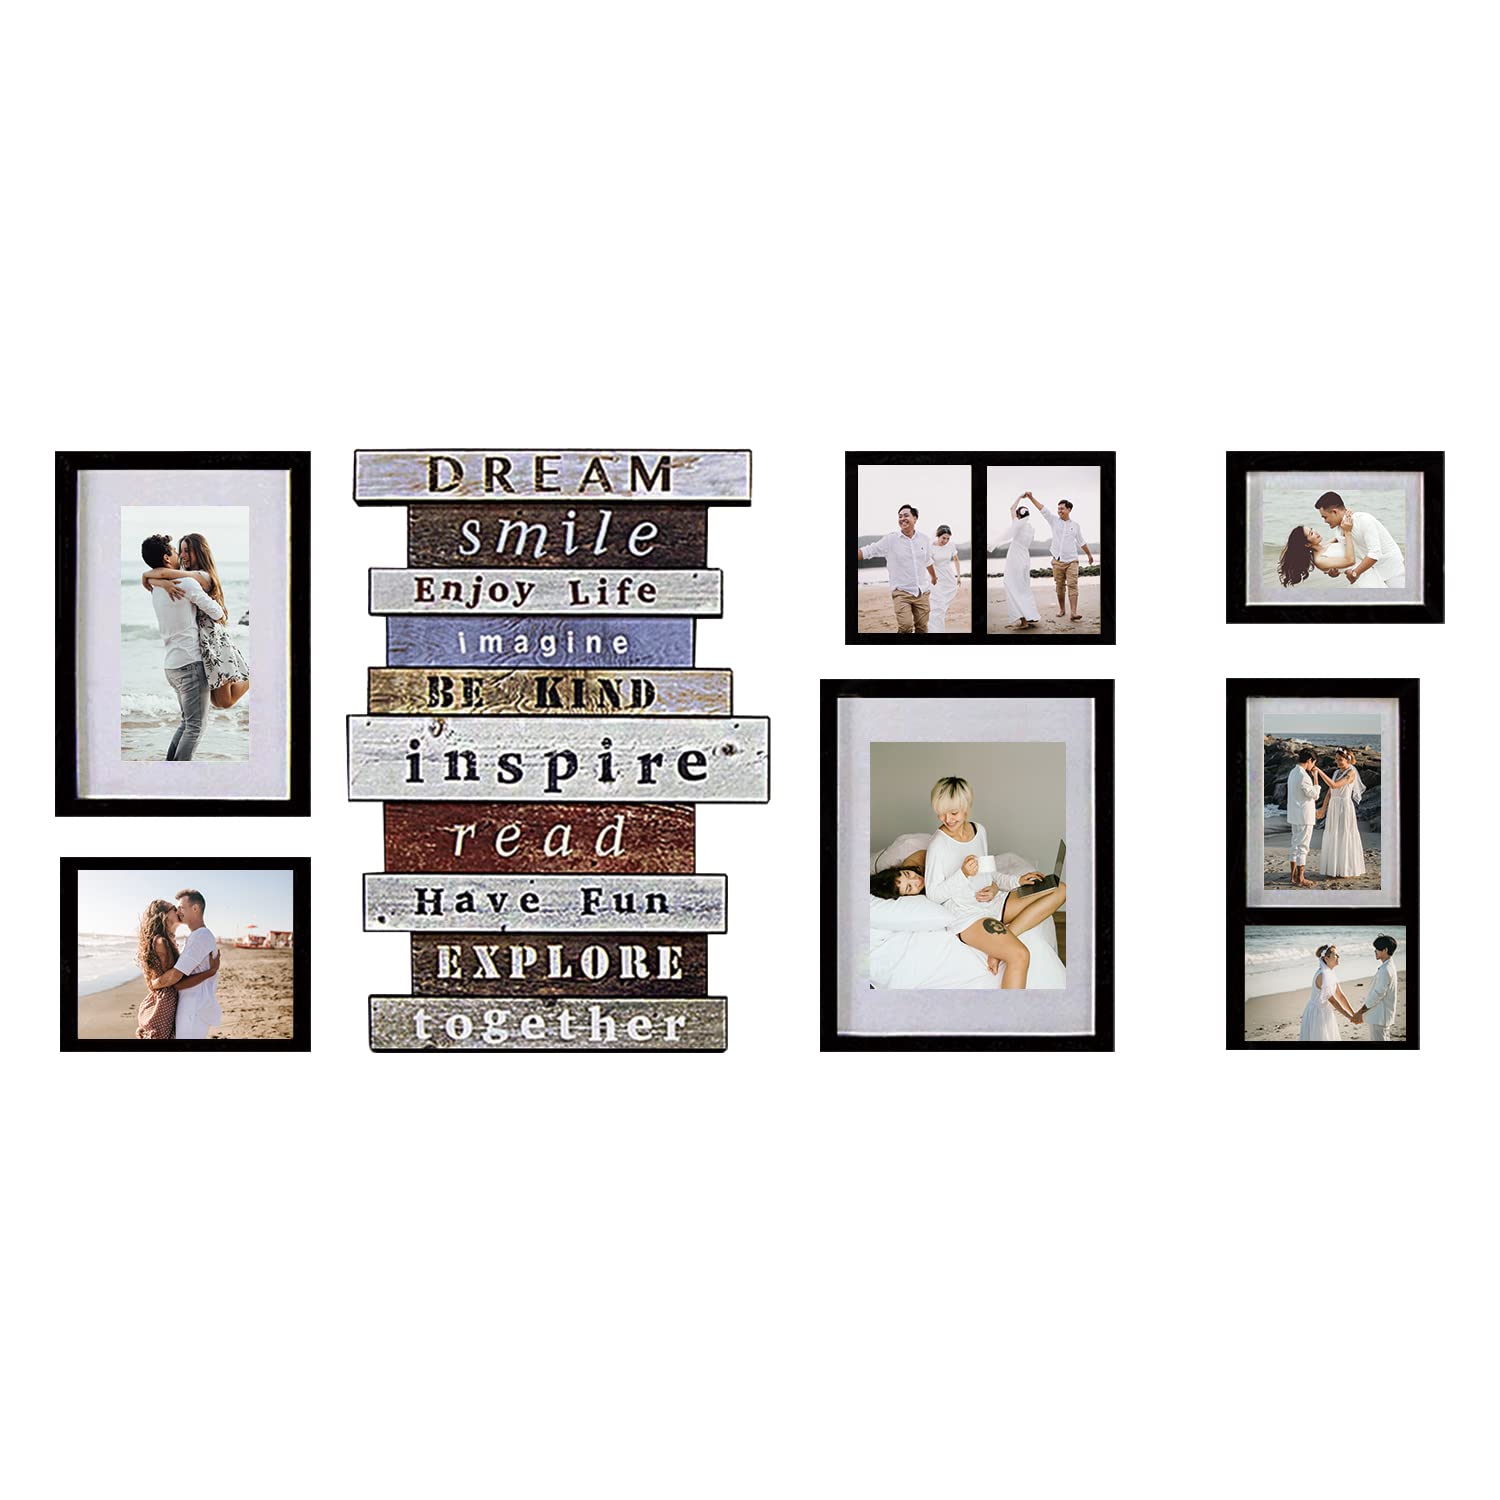 Hello Laura - Photo Frame Classic Picture Portrait Frame Gallery Collection Wall Hanging Photo Frame Set - Multi Sockets with Inspiring Decor Bar f...